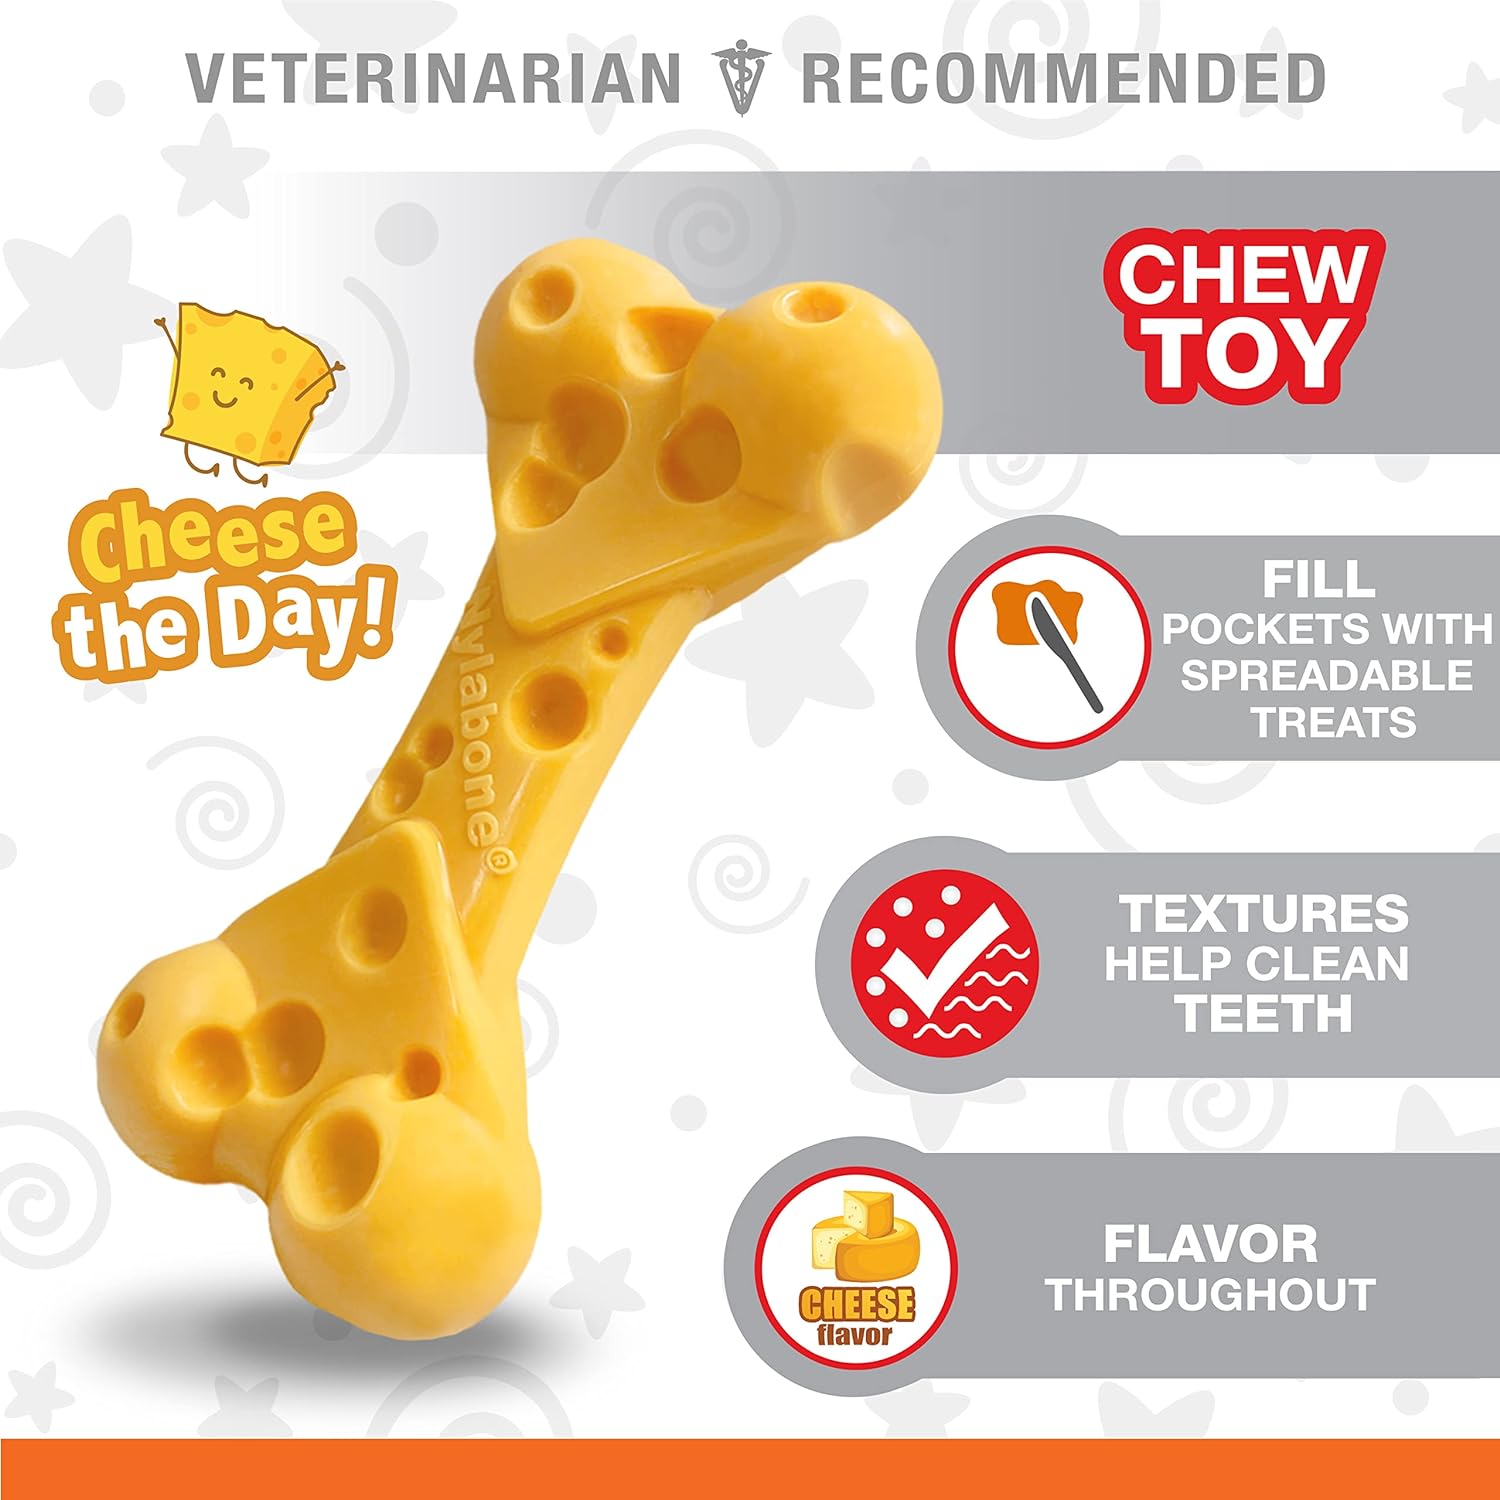 Nylabone Cheese Dog Toy - Power Chew for Aggressive Chewers - Medium/Wolf Size